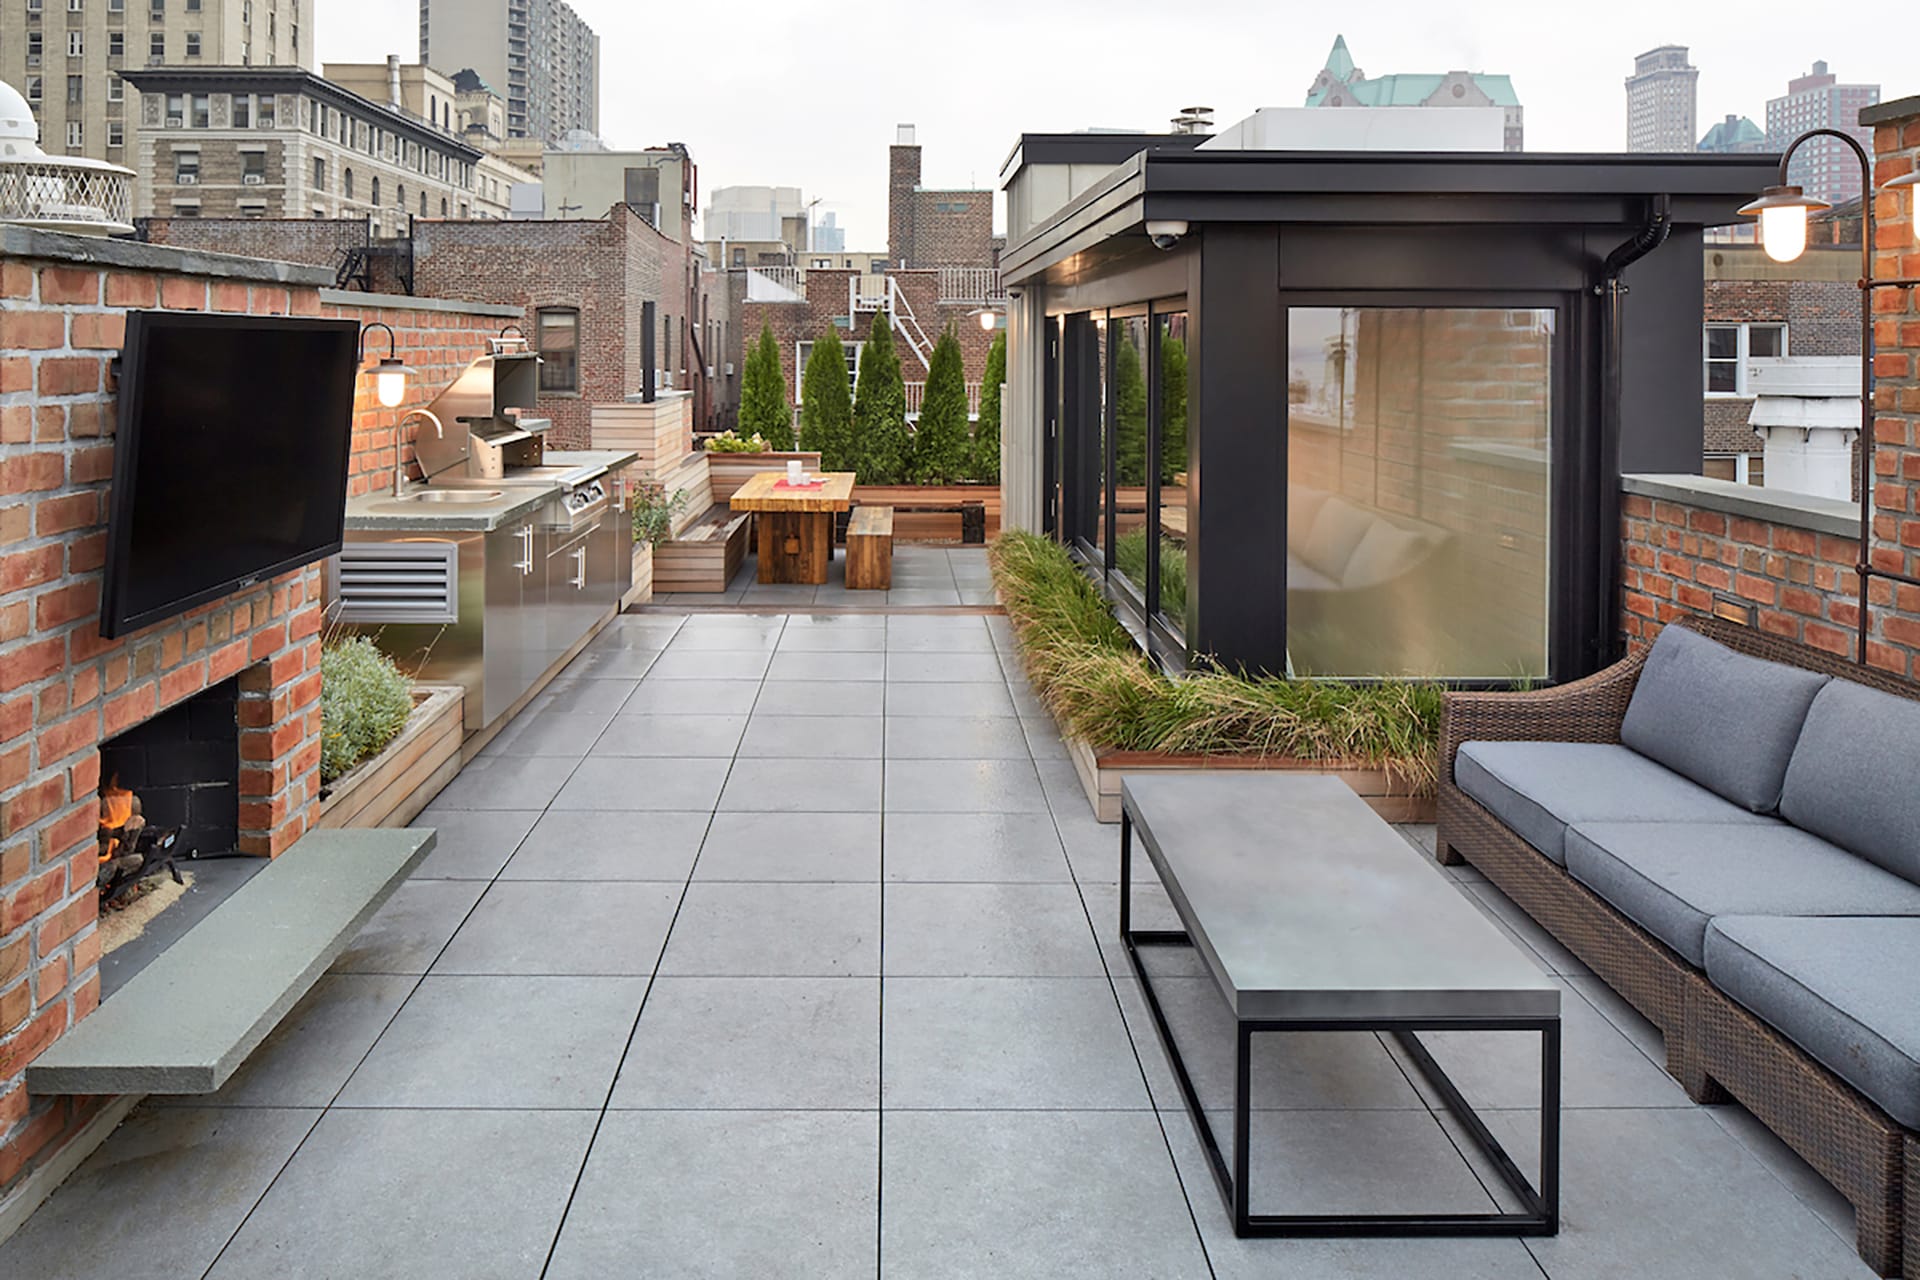 Rooftop with a black bulkhead, bluestone pavers, and an outdoor kitchen.